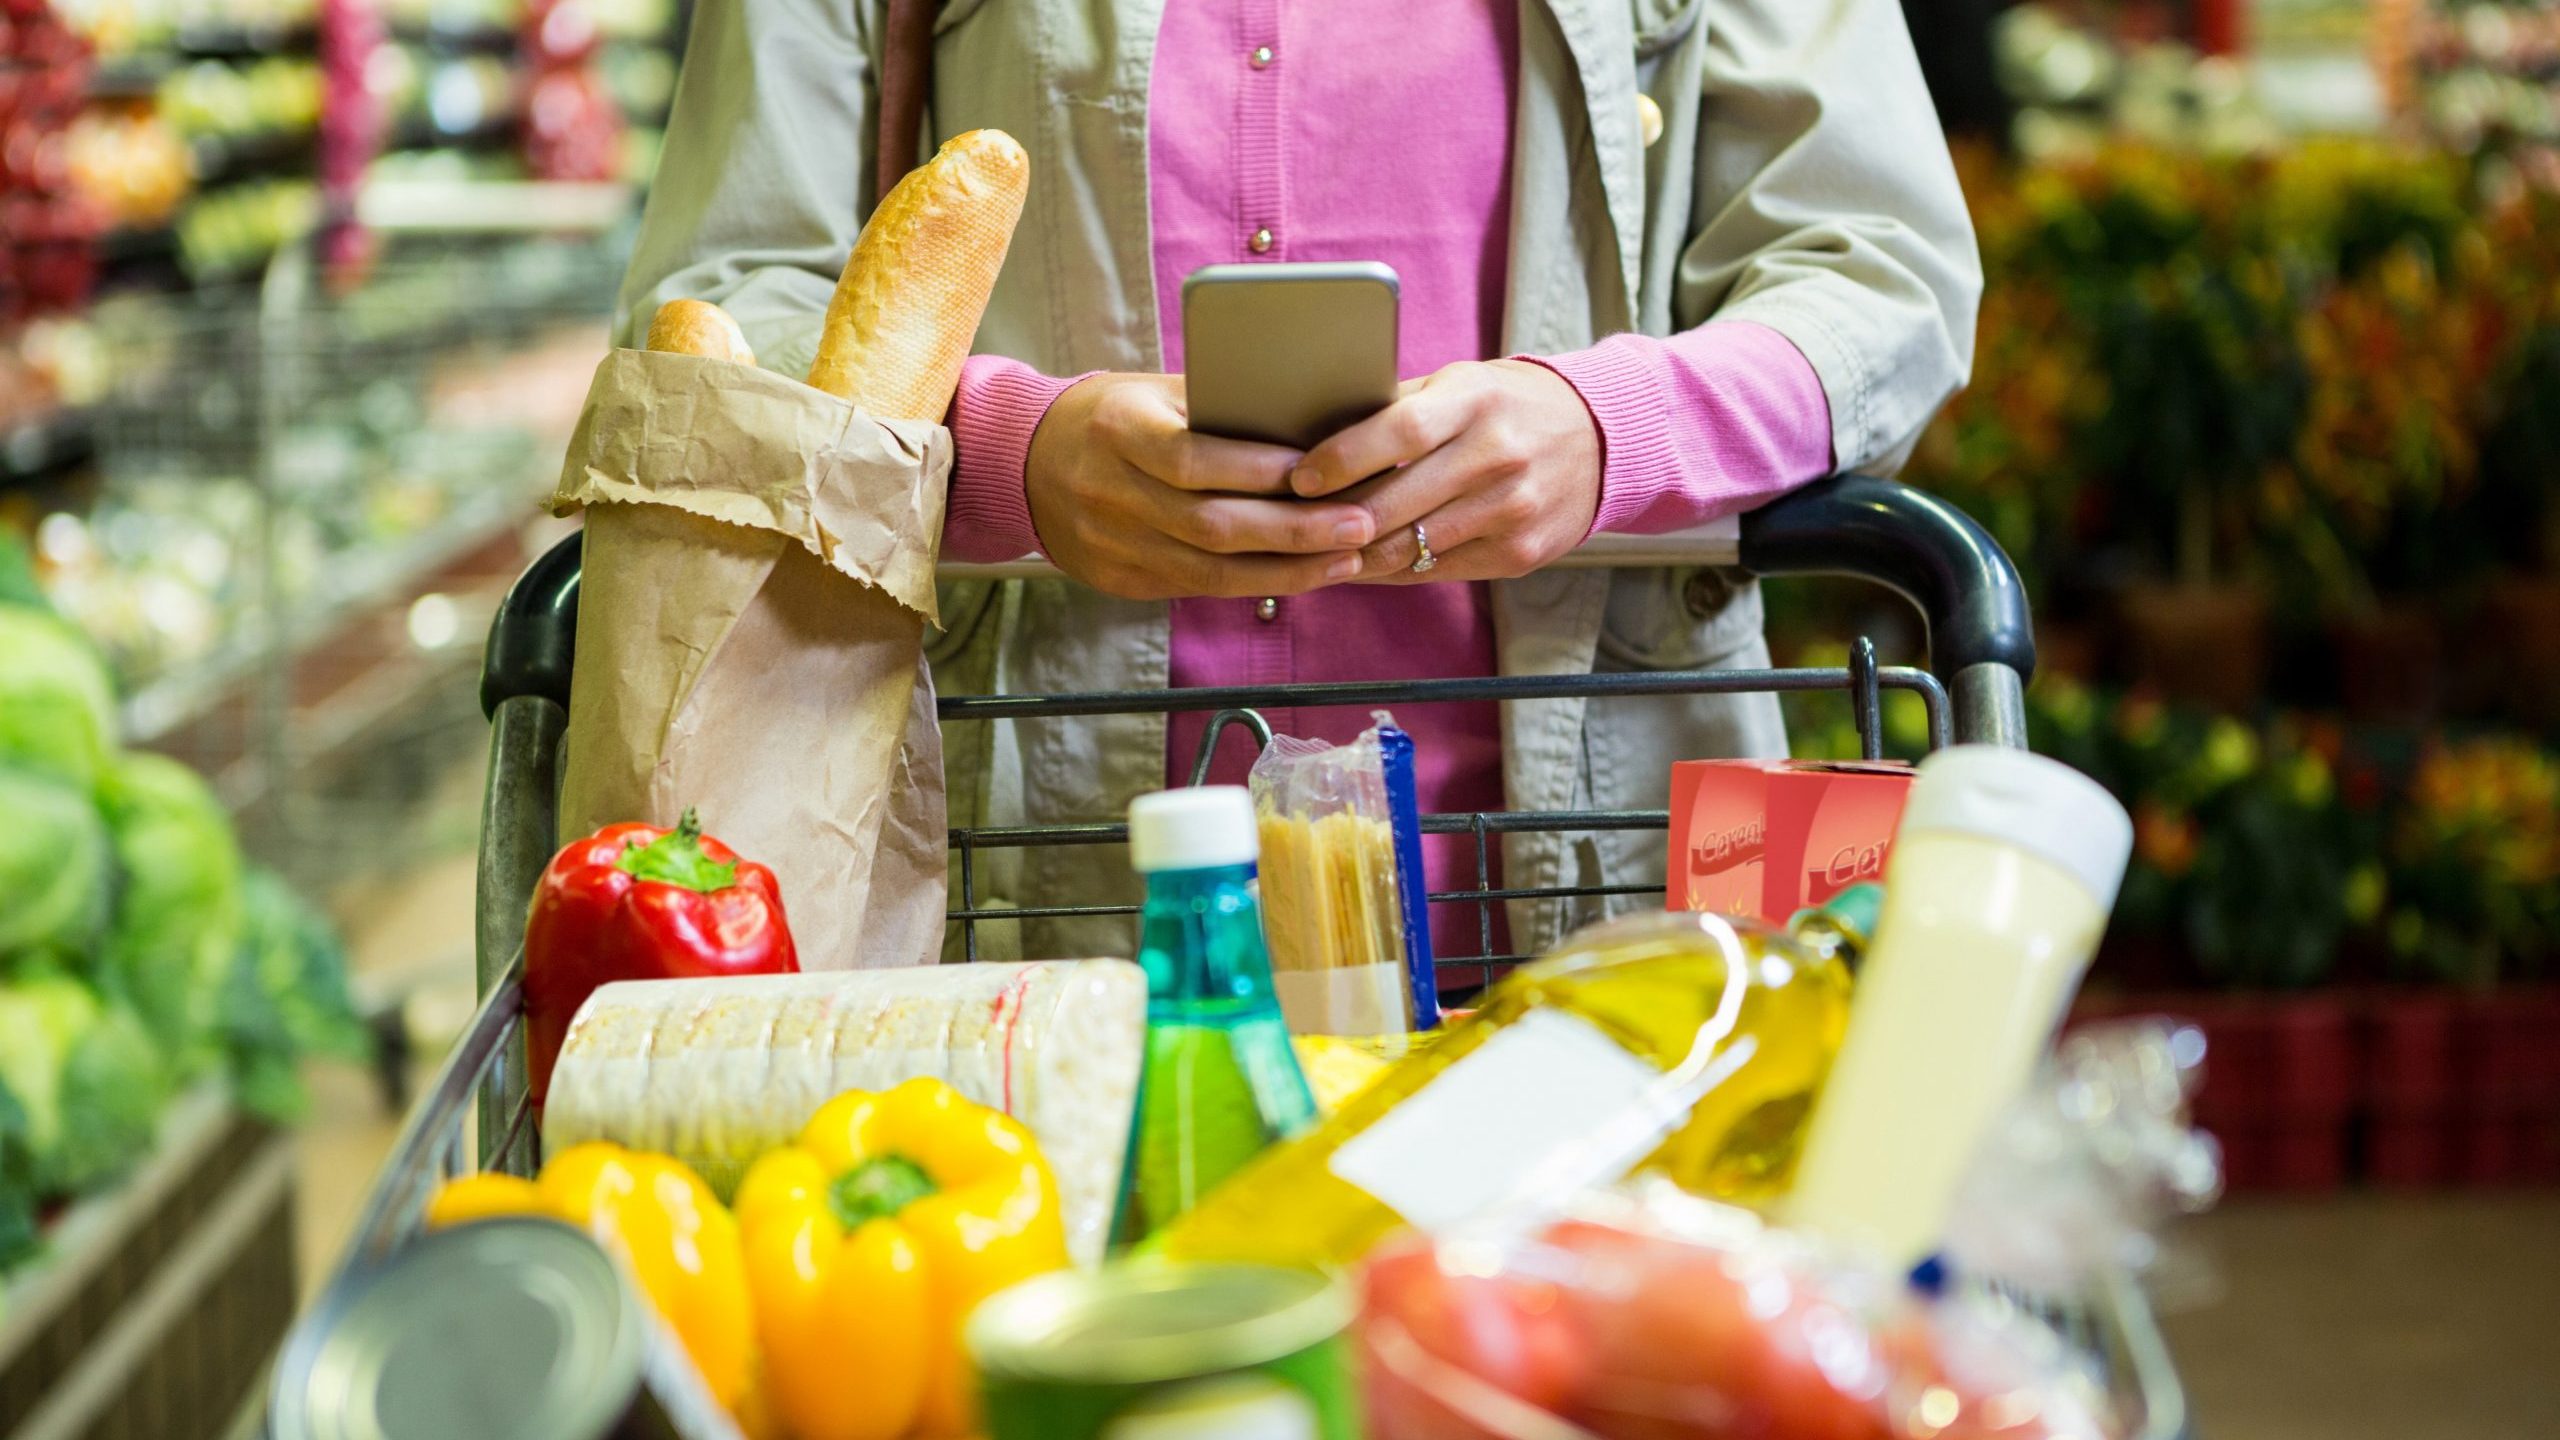 Shopper uses mobile phone at grocery store